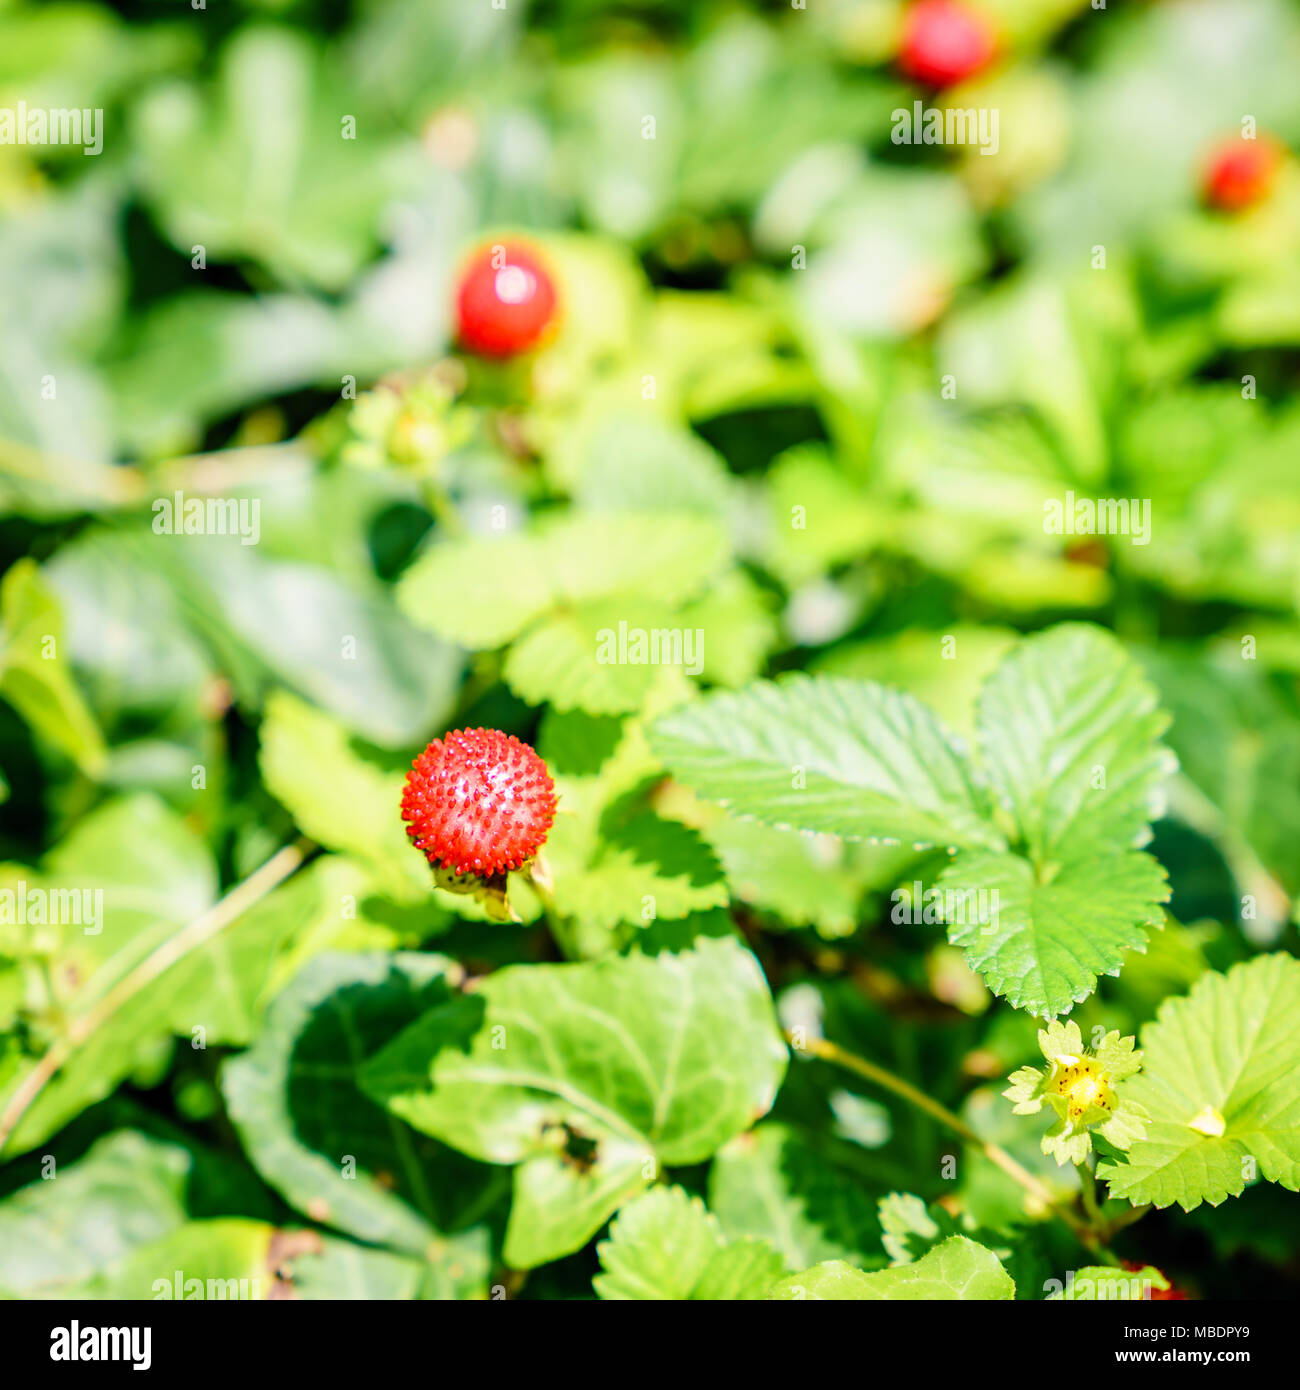 Close-up image of a wild strawberry in a garden Stock Photo